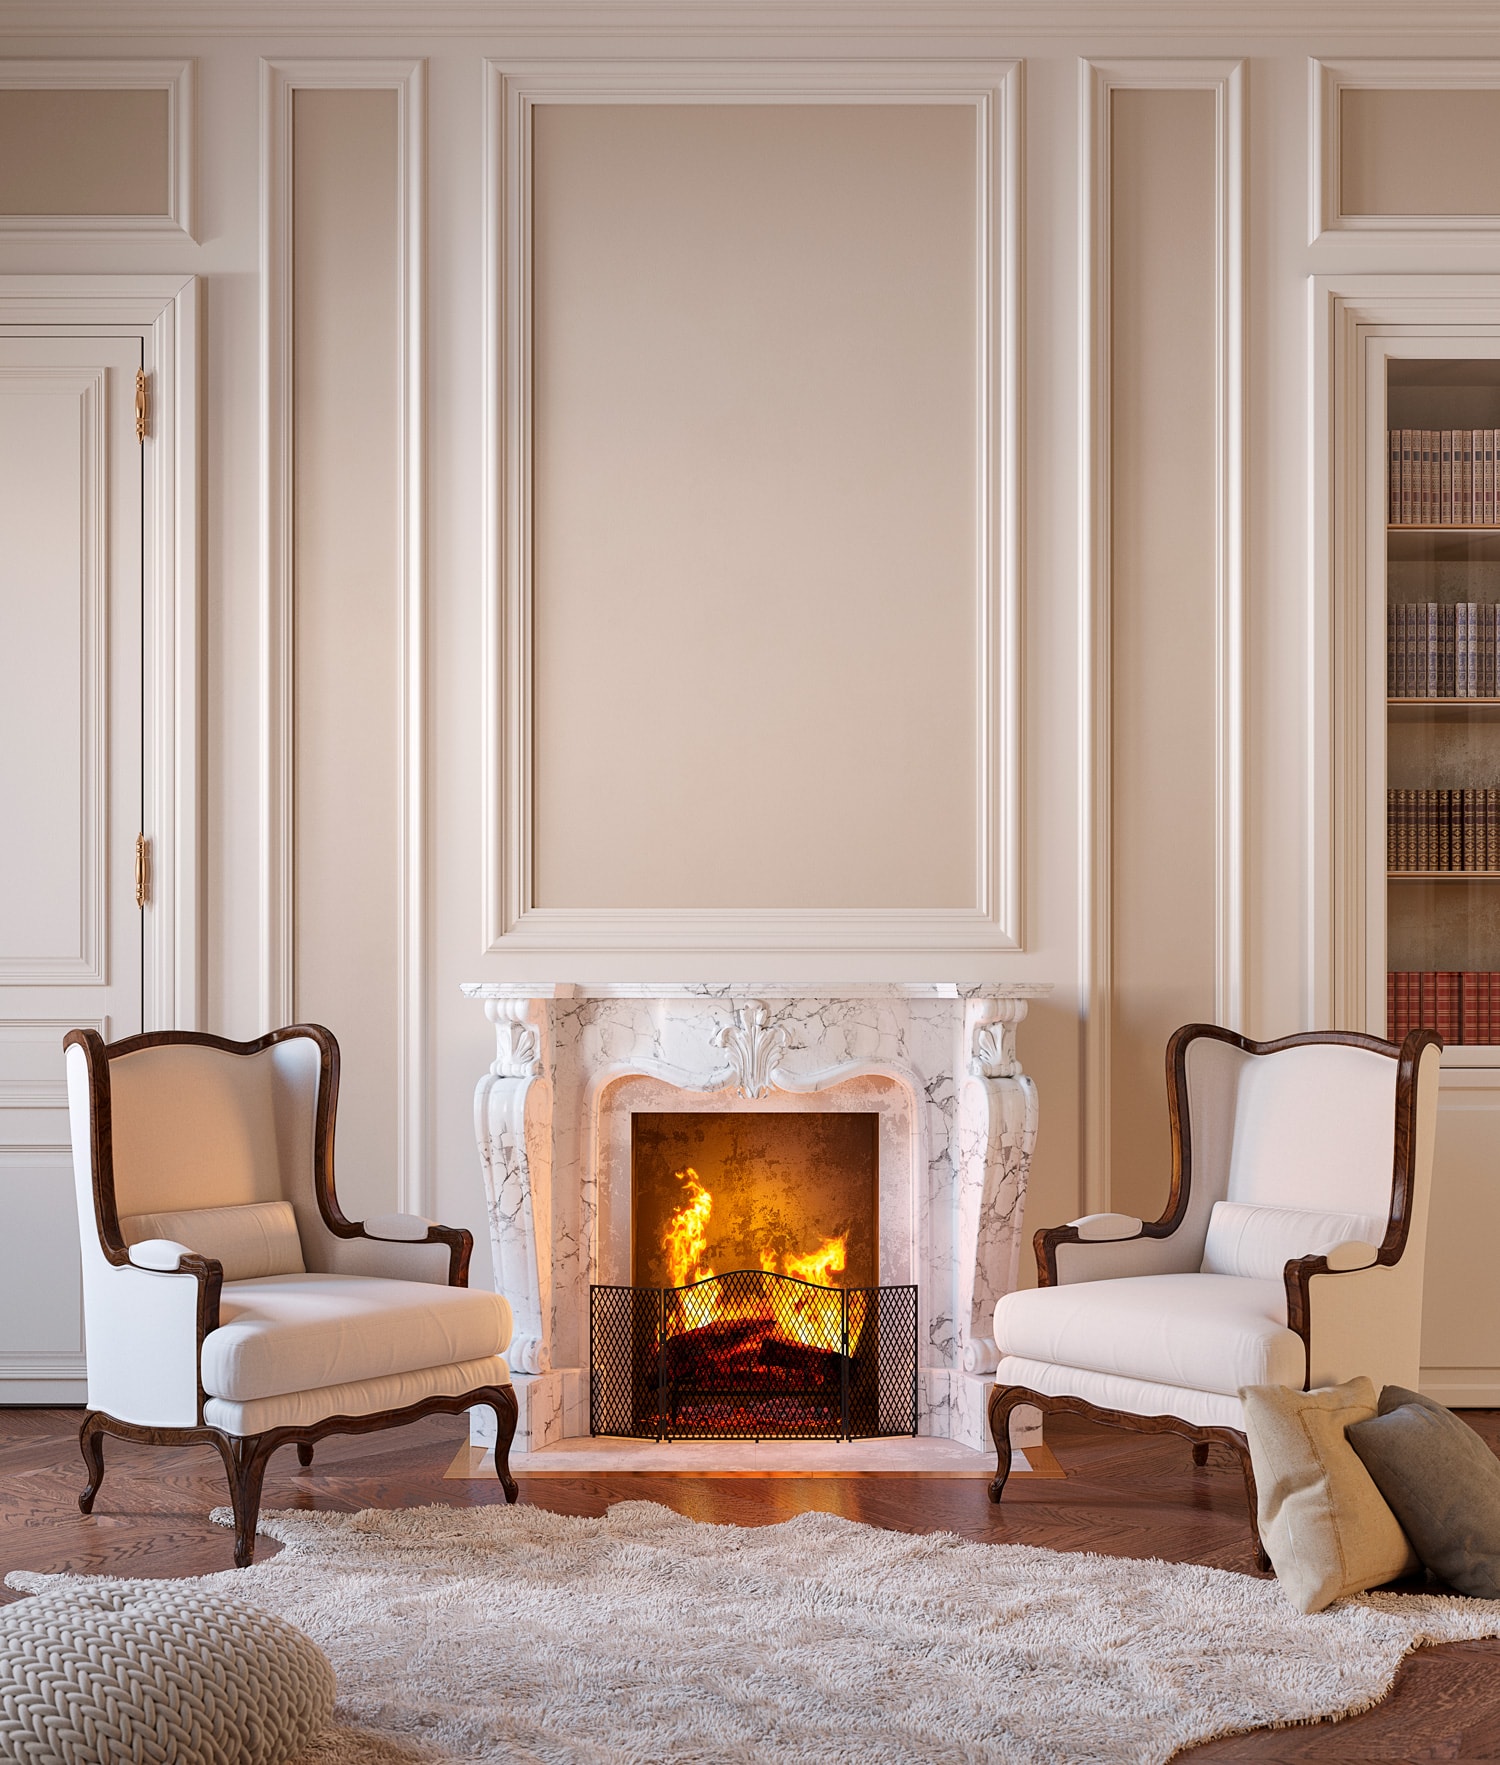 Classic beige interior with fireplace, armchairs, moldings, wall pannel, carpet, fur. 3d render illustration mock up.